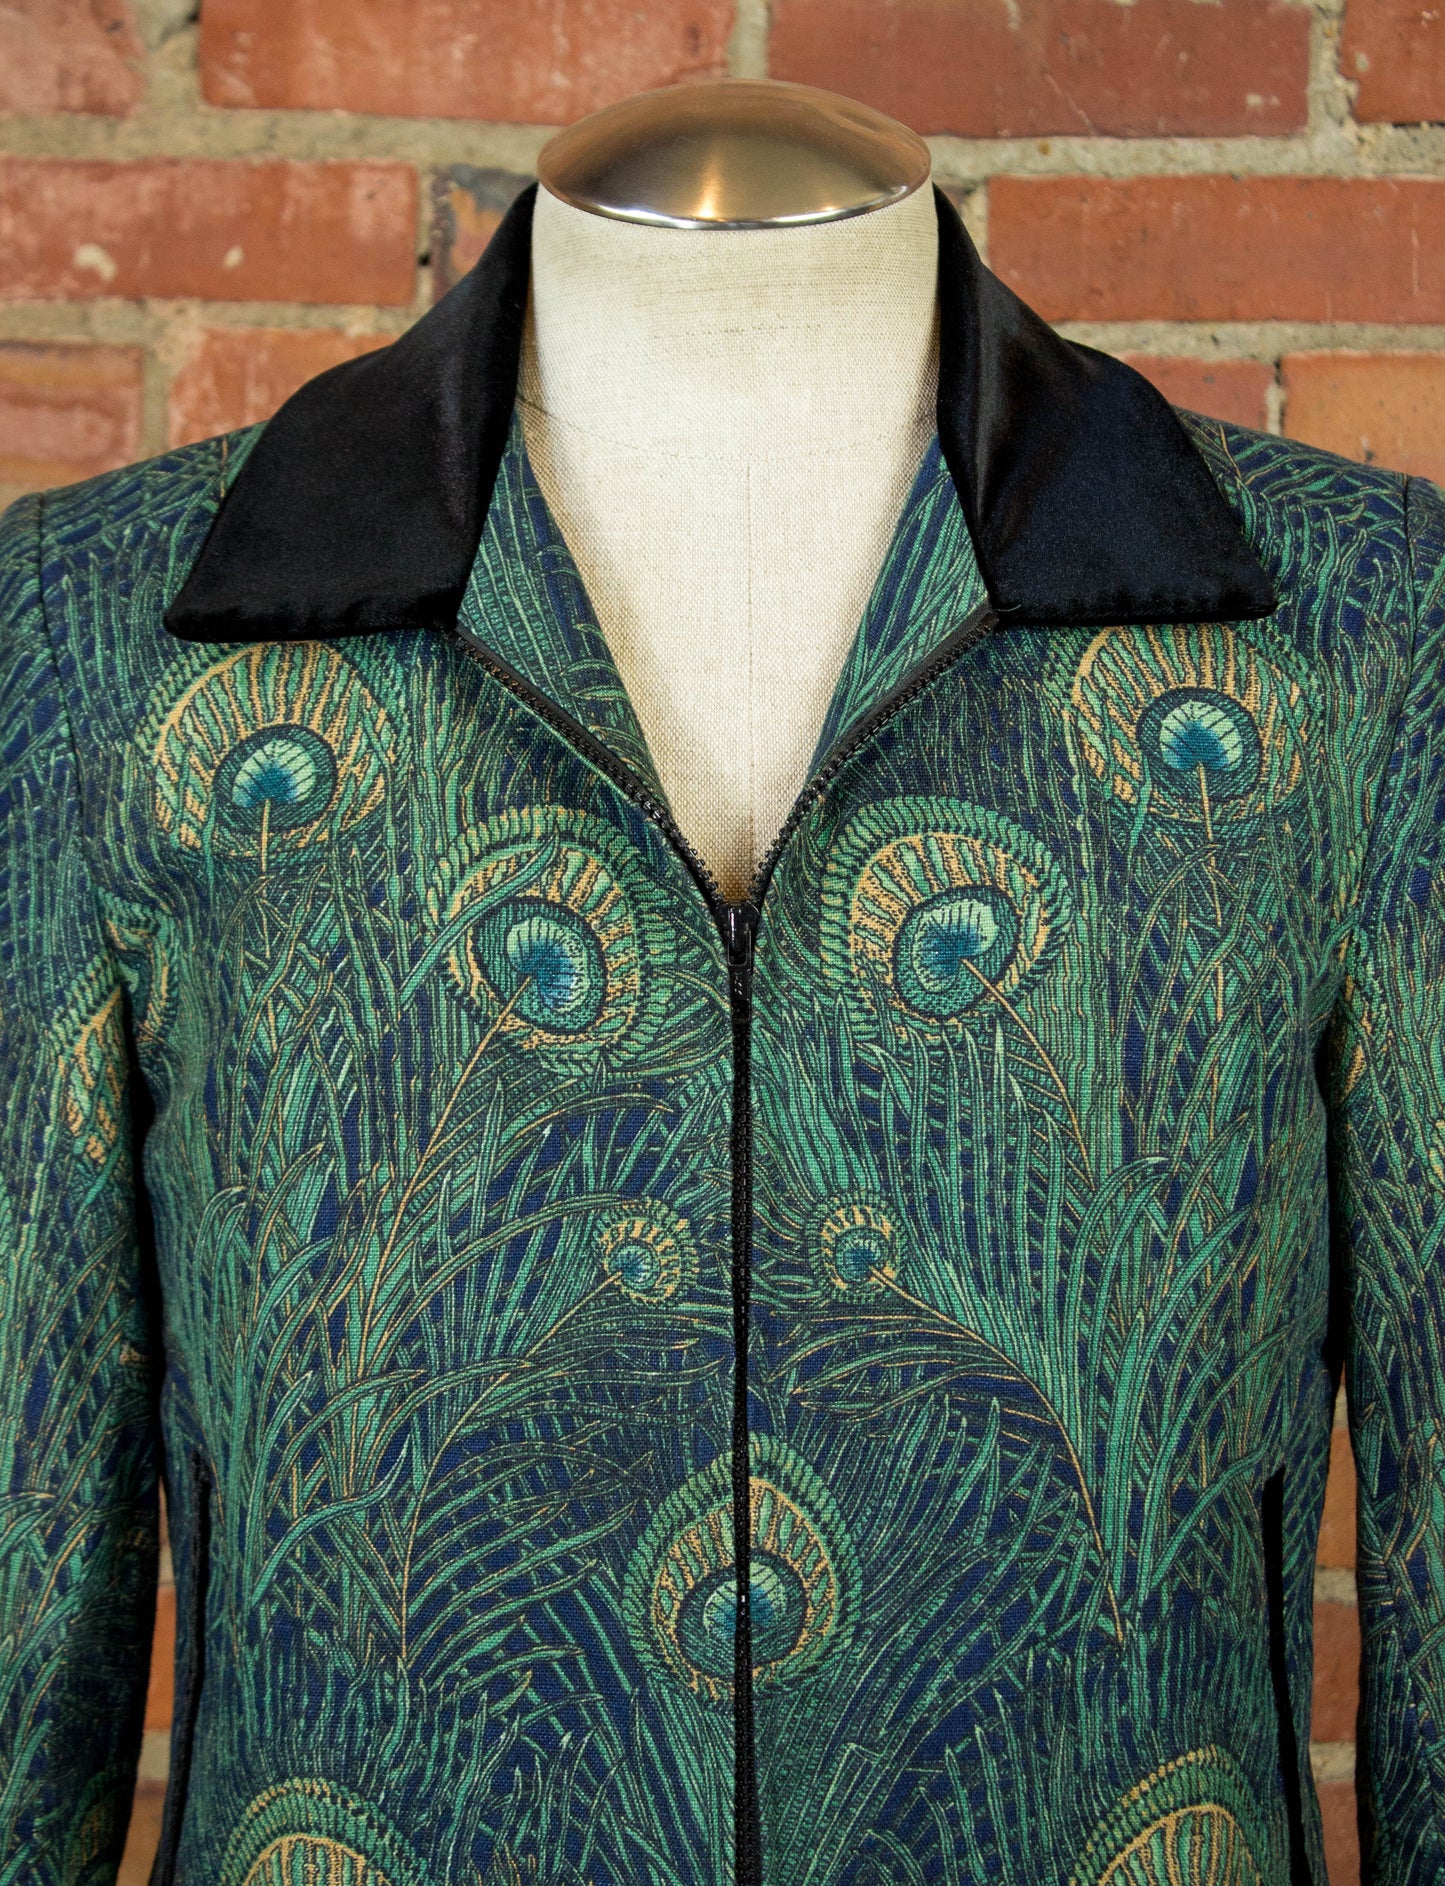 Vintage 70s Granny Takes a Trip Peacock Jacket with Black Velour Accents Small